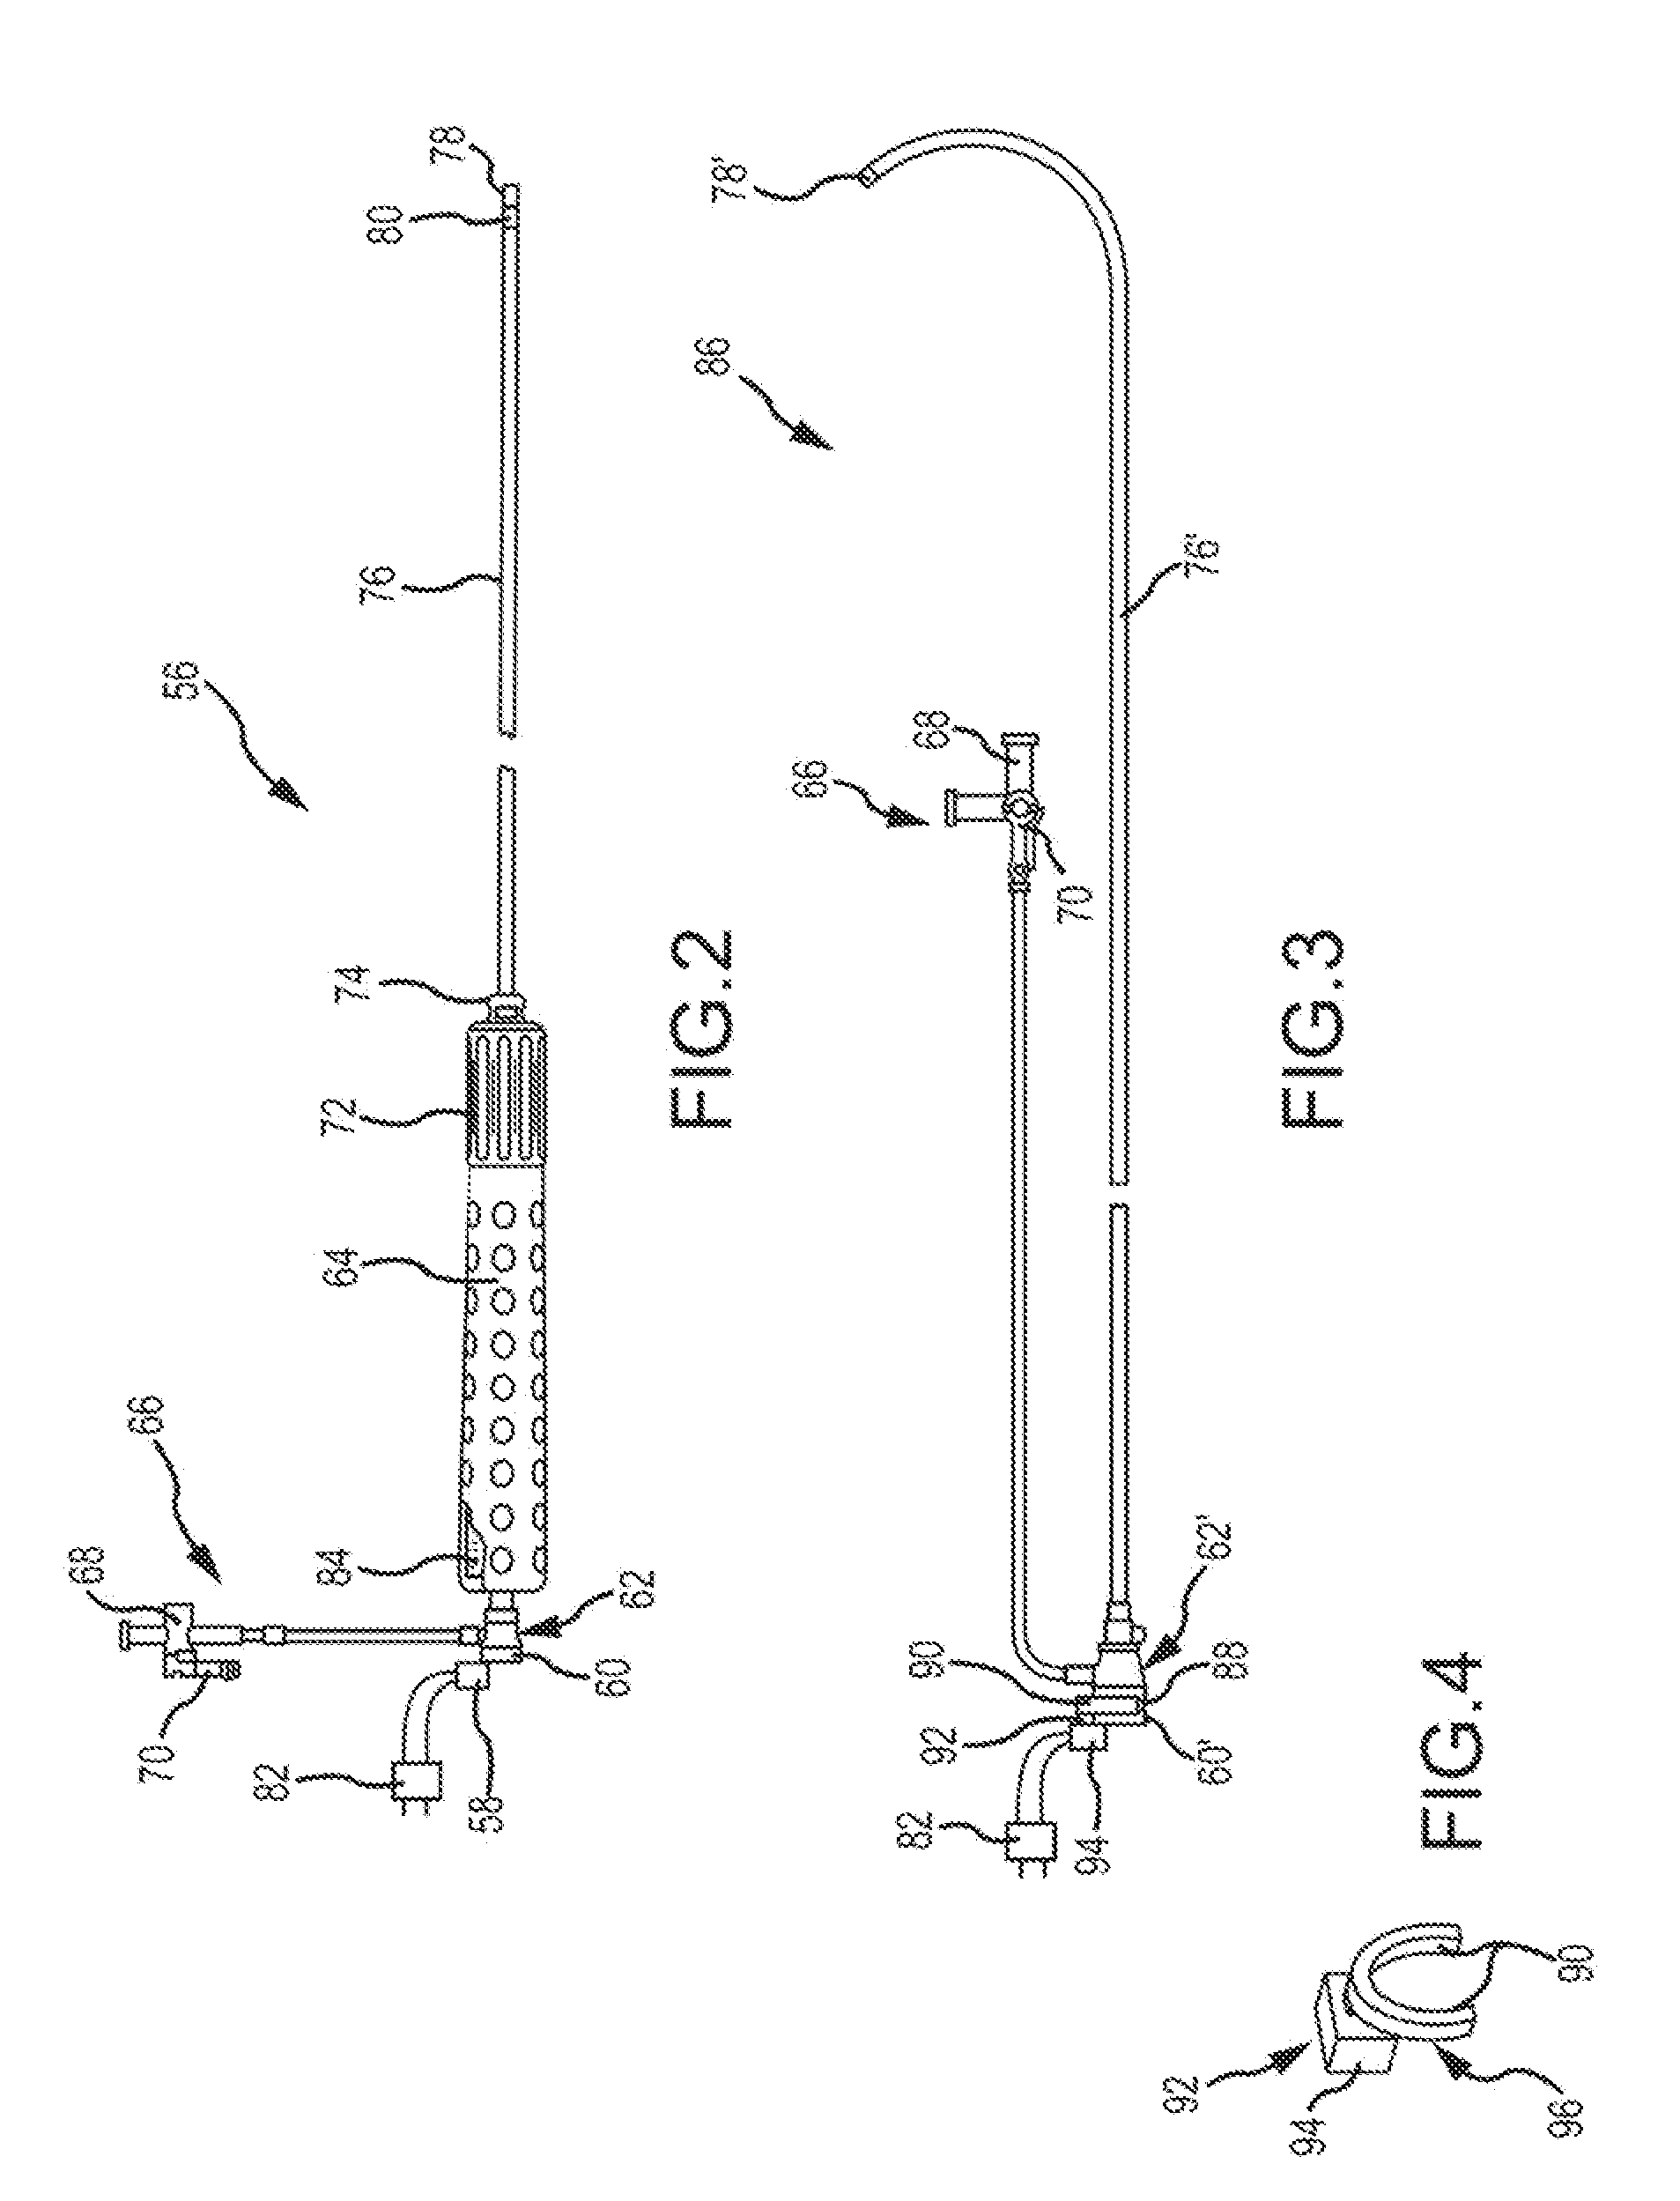 System for detecting catheter electrodes entering into and exiting from an introducer